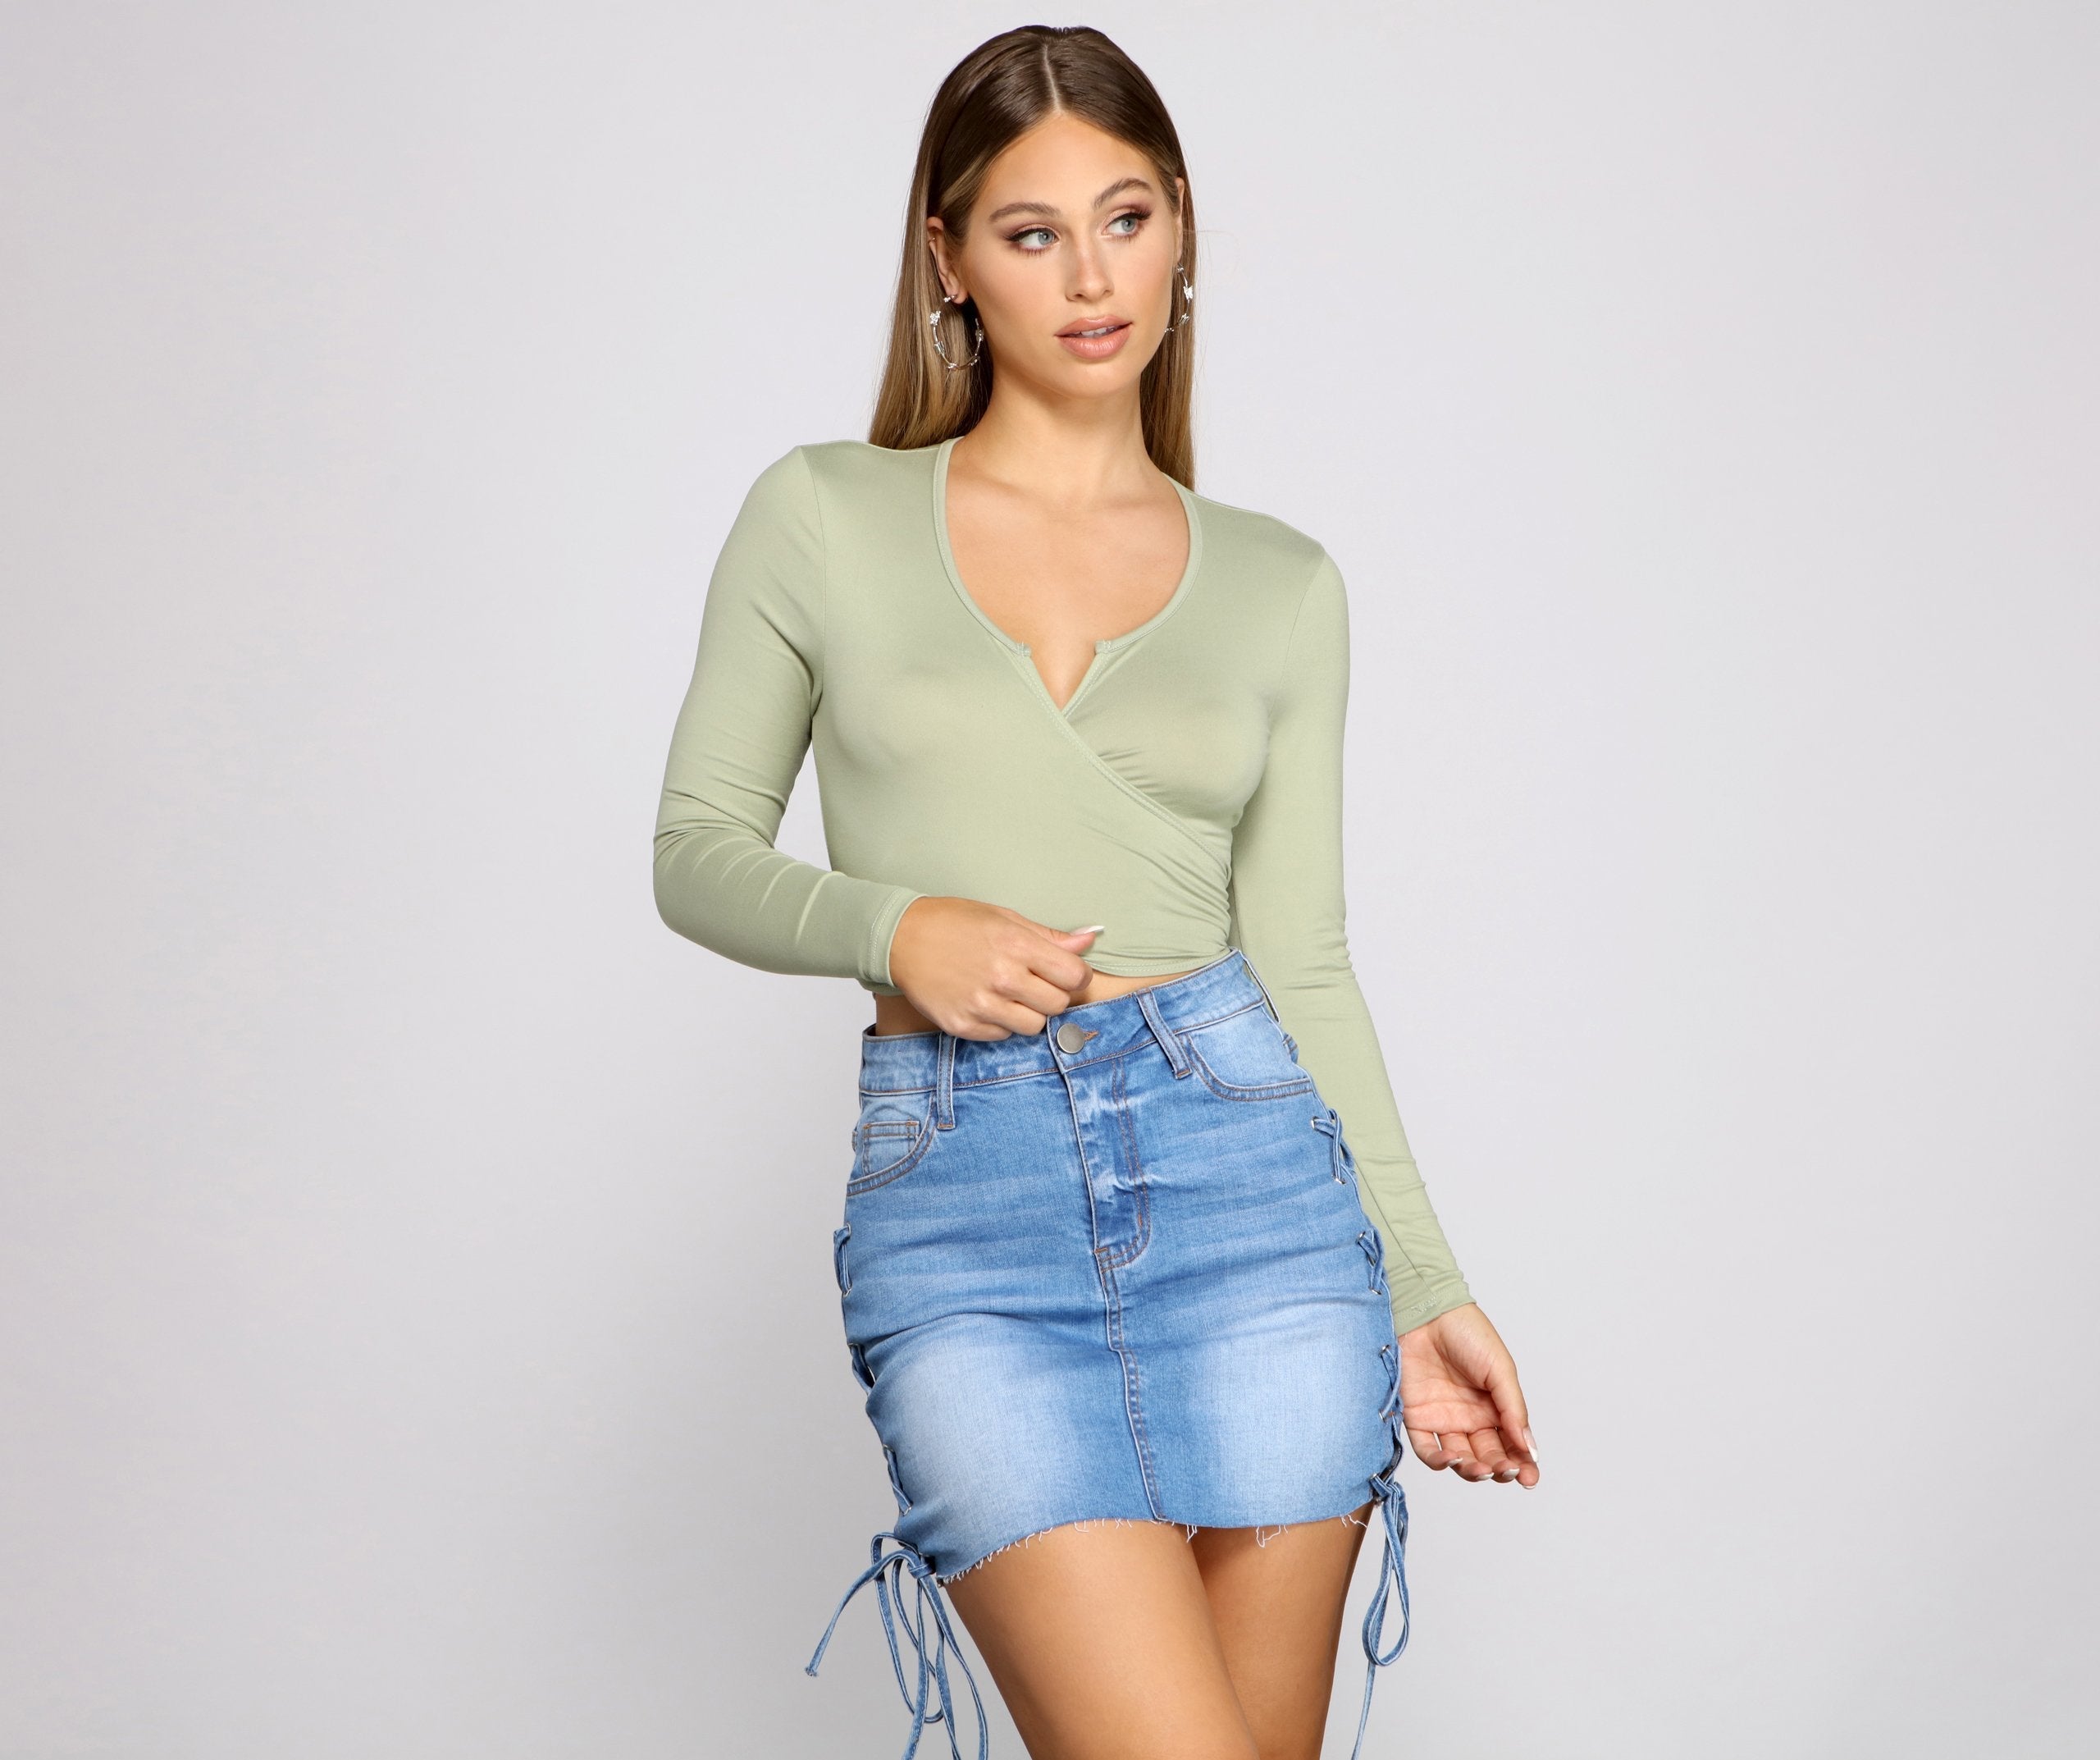 Falling For Basics Tie-Front Top - Lady Occasions